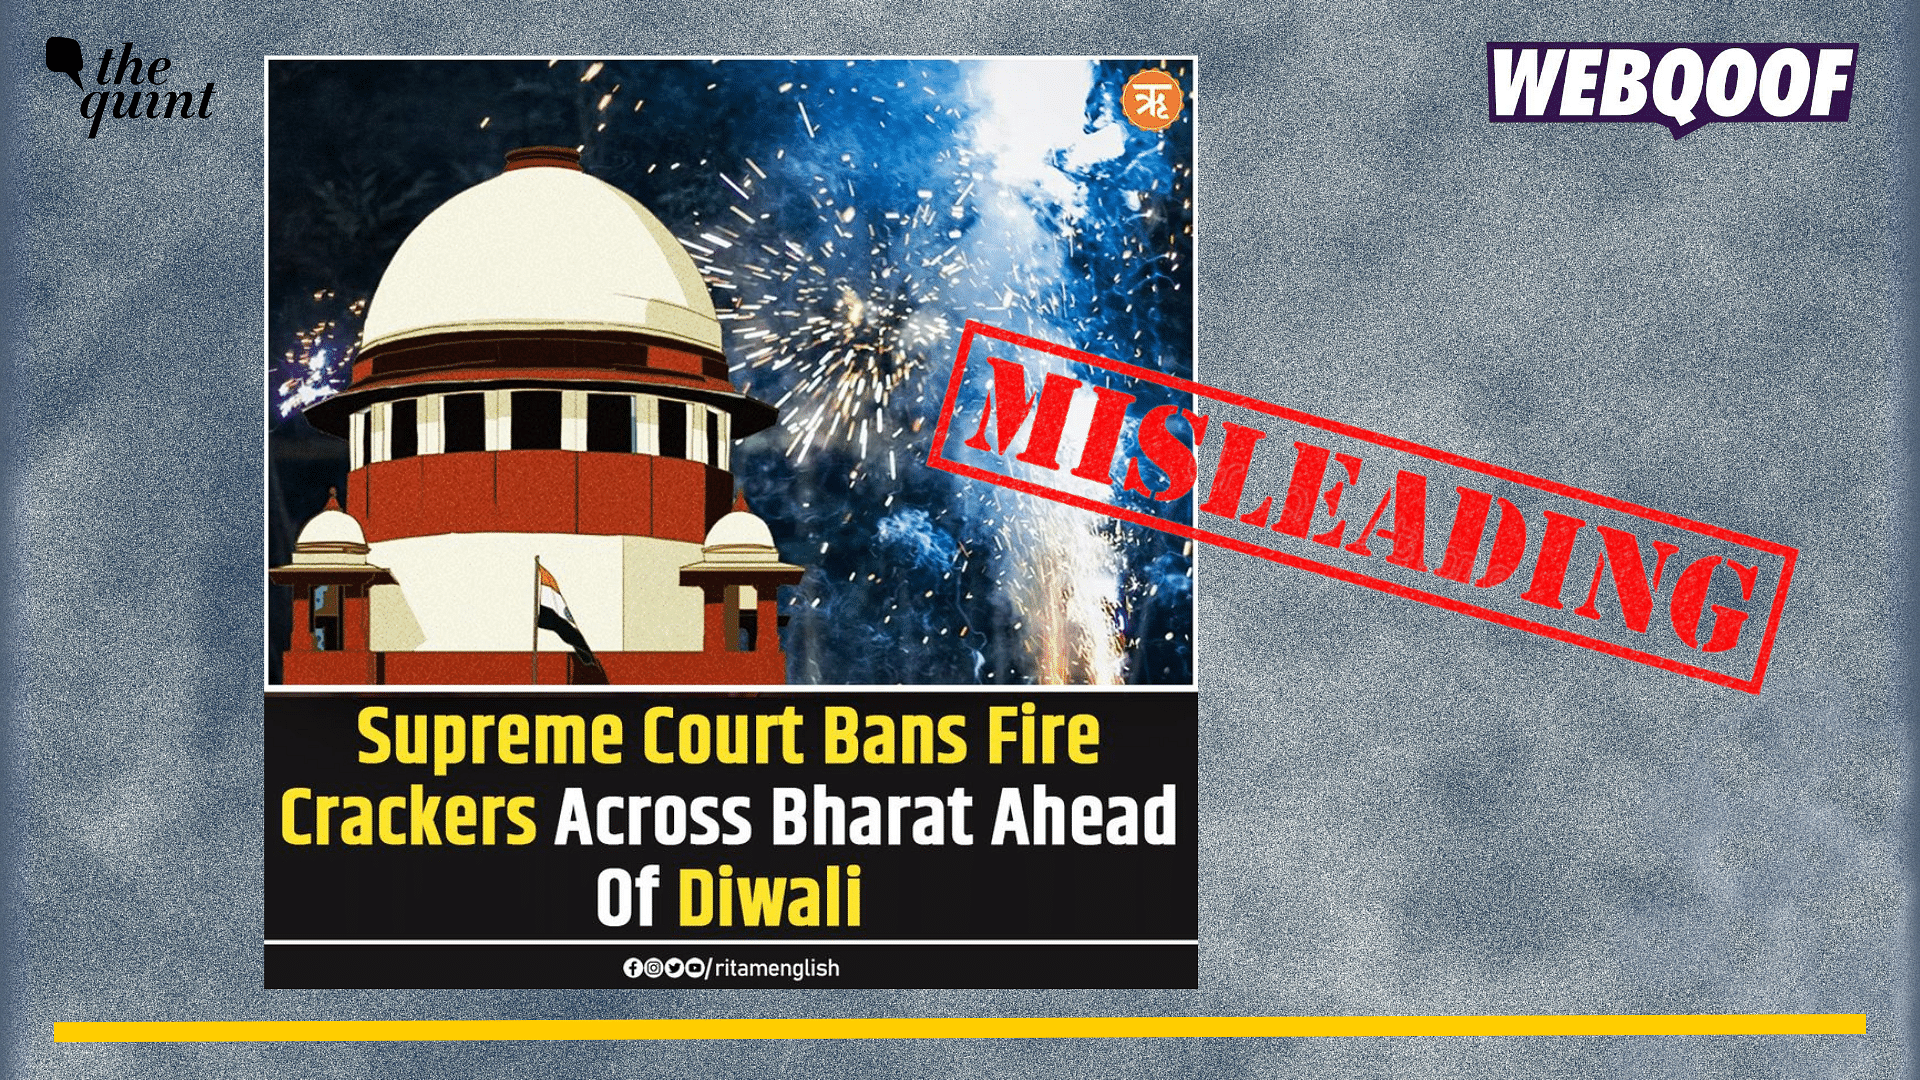 <div class="paragraphs"><p>Fact-Check: The Supreme Court has not banned firecrackers in India but has issued regulations against barium-based chemicals in crackers across country.</p></div>